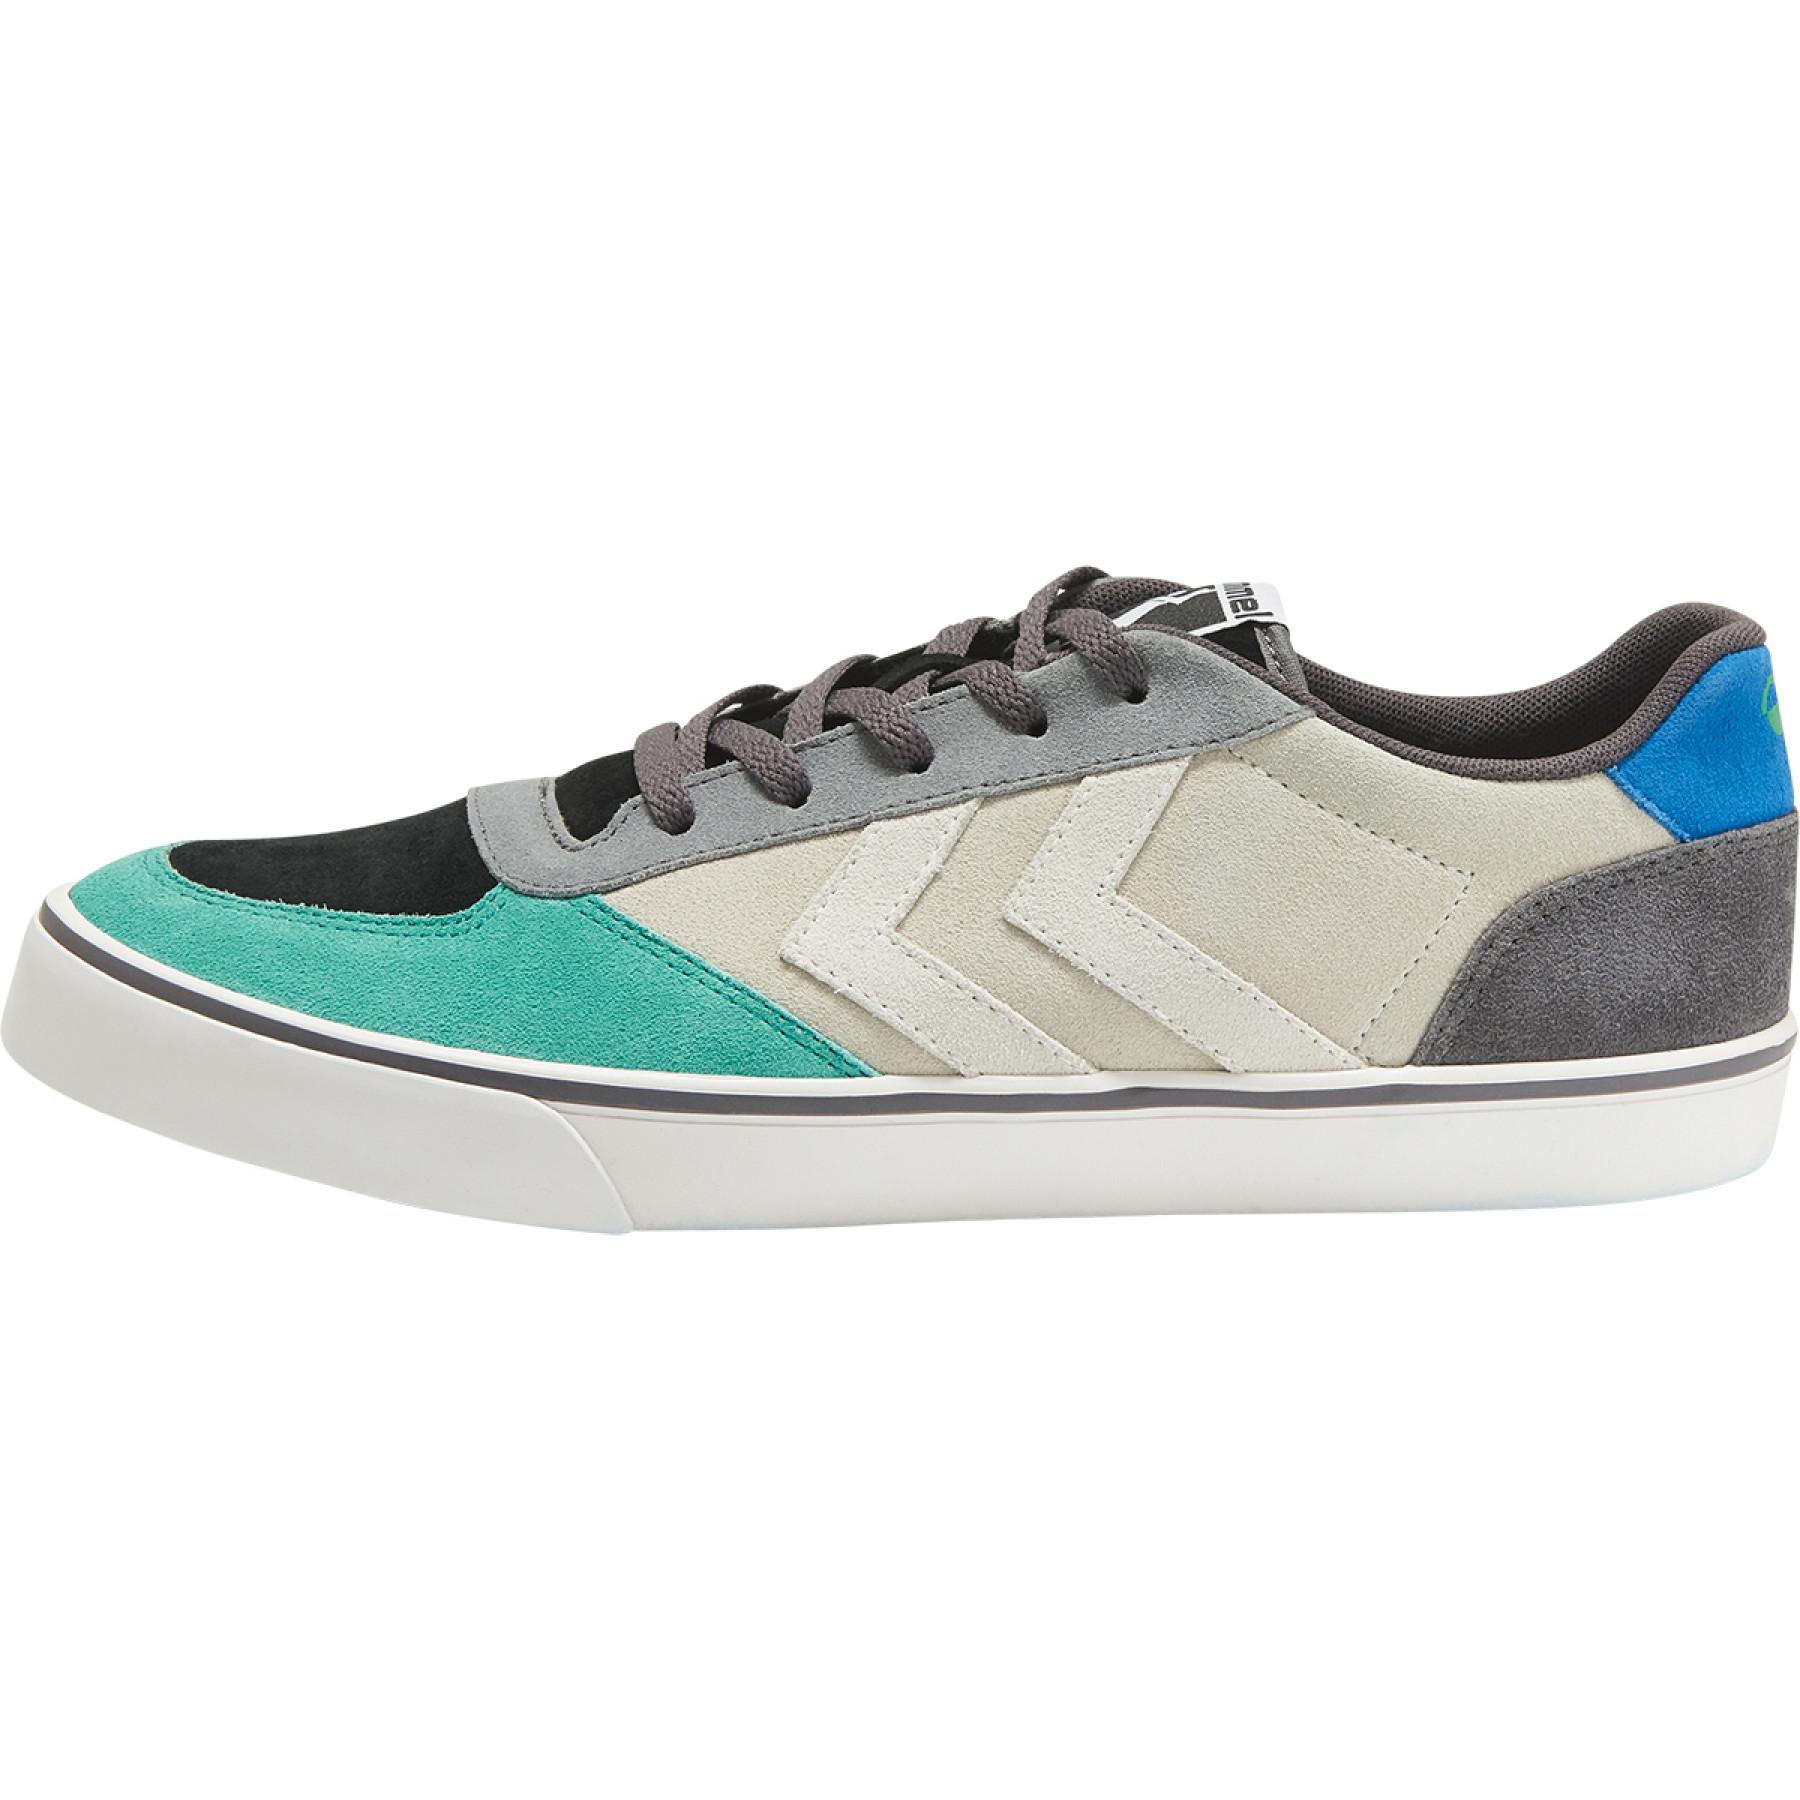 Trainers Hummel Stadil 3.0 Suede Multi